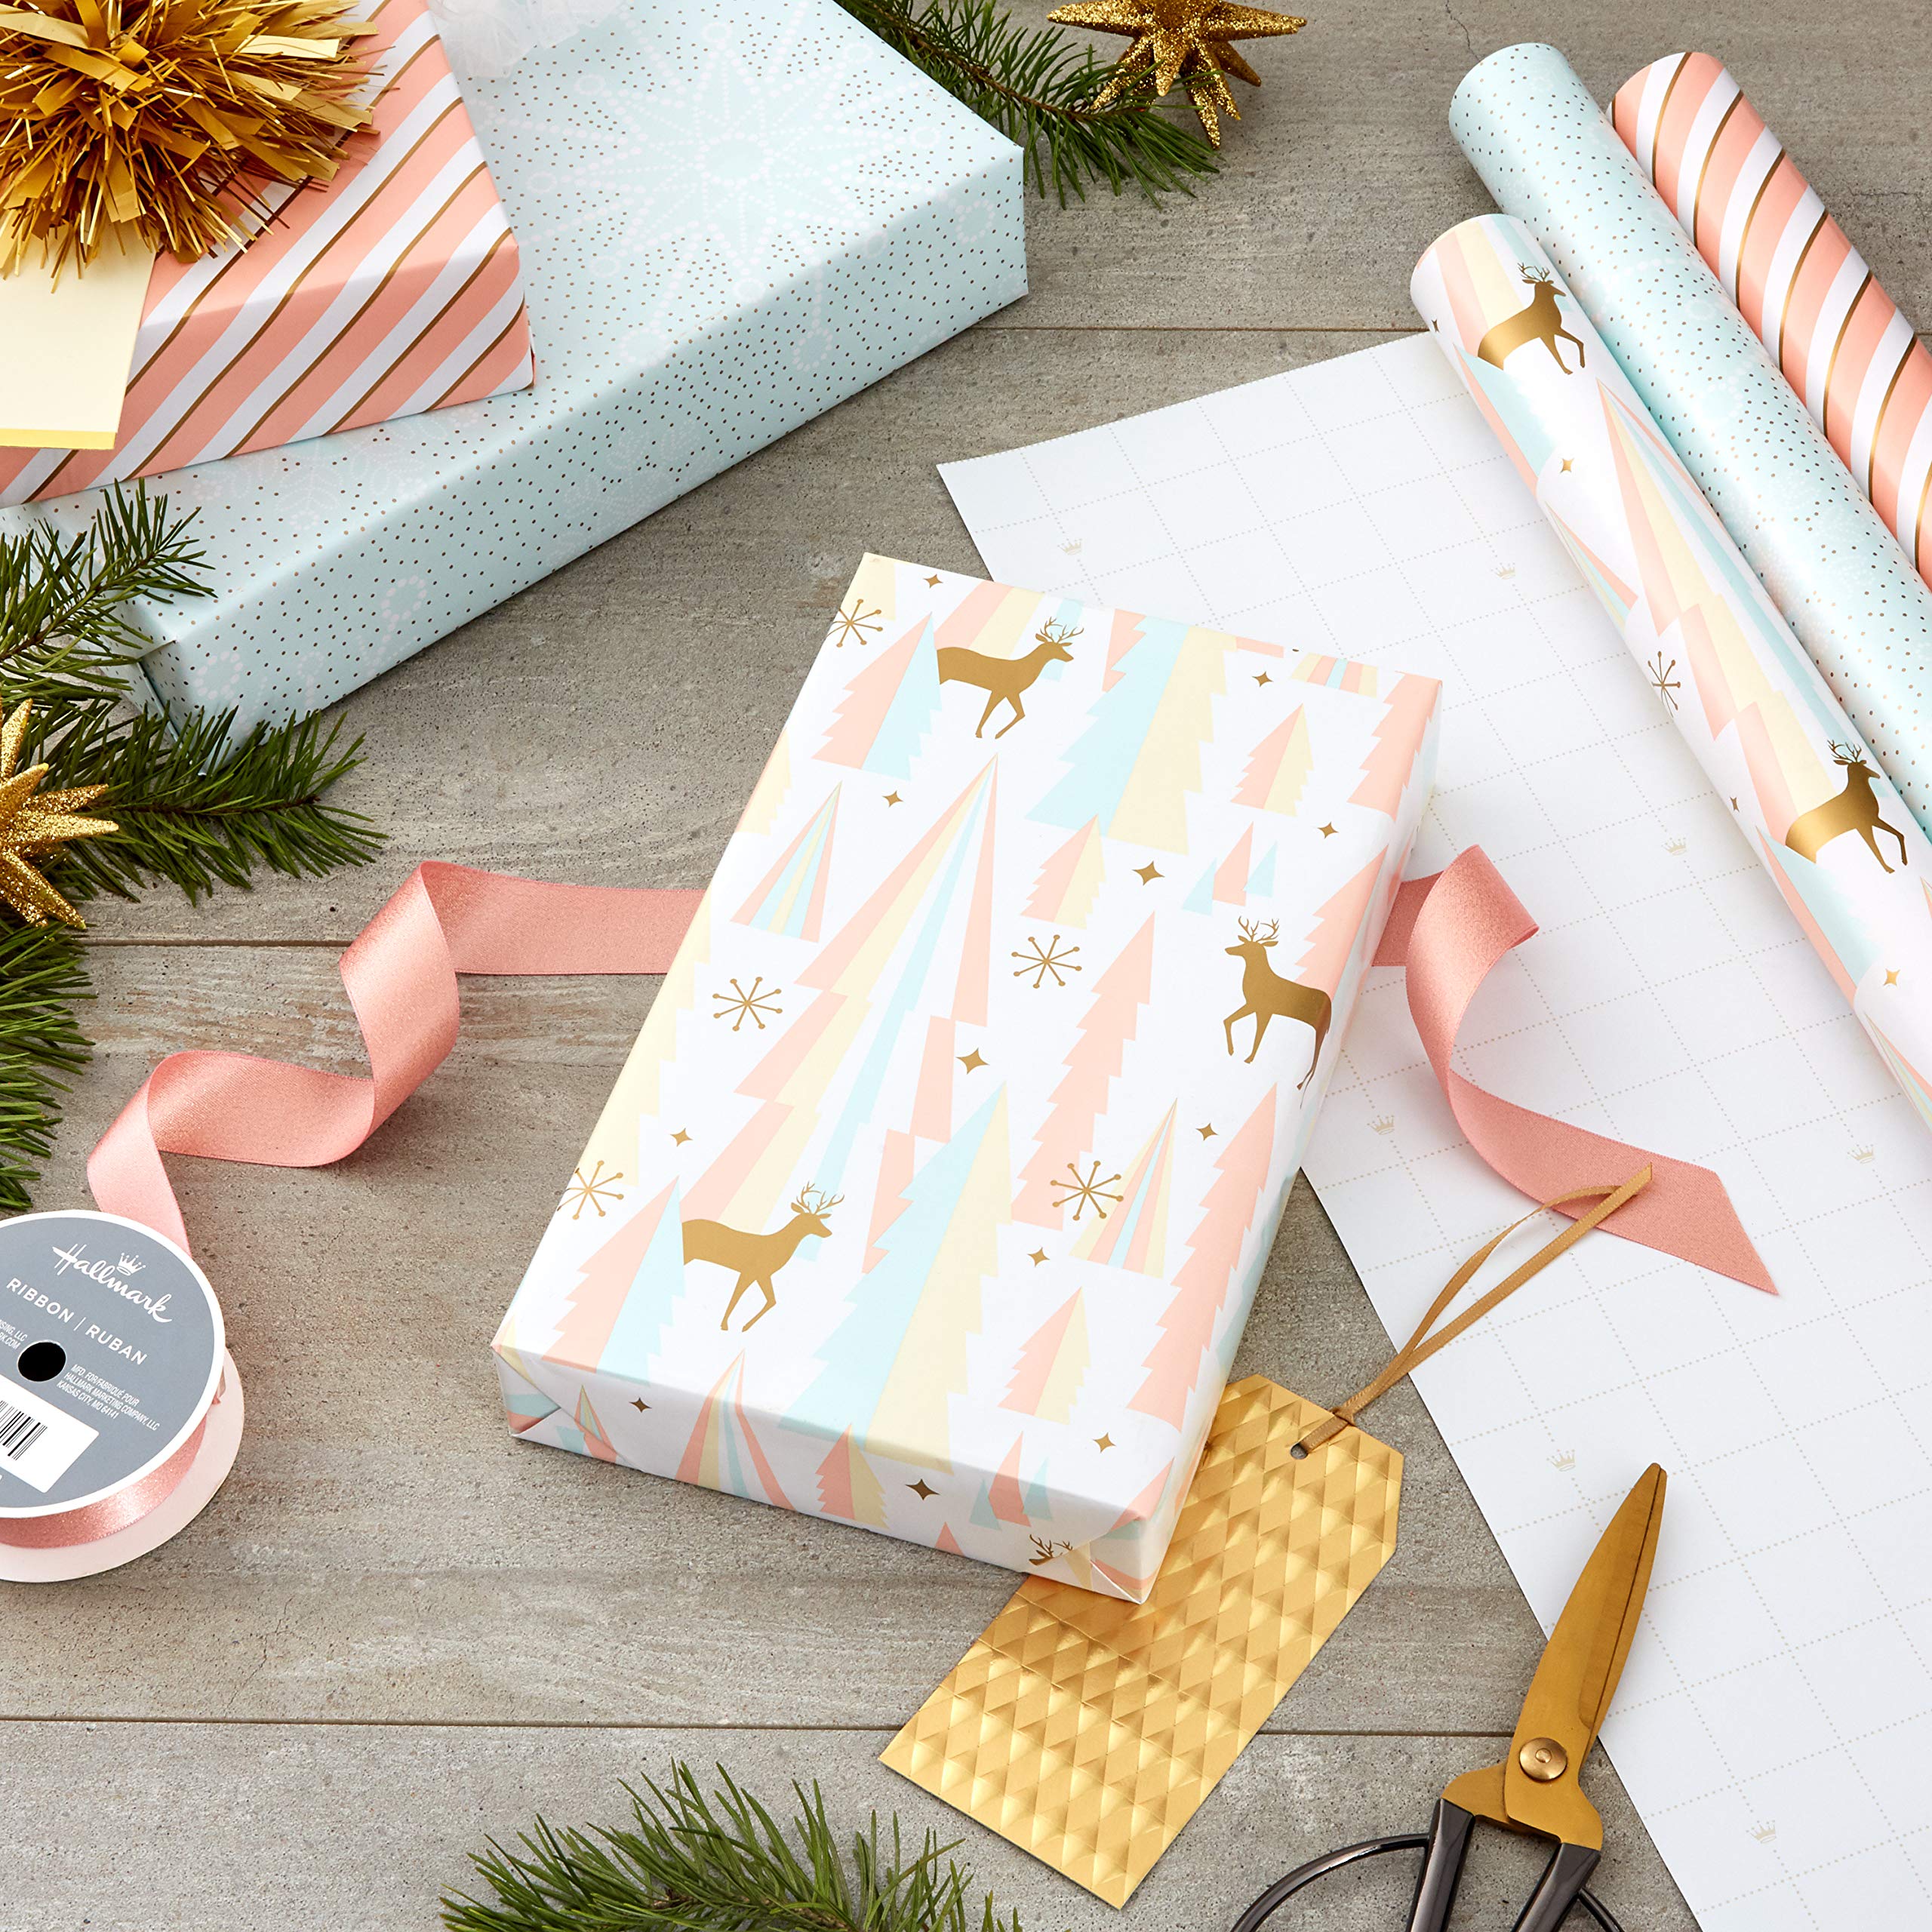 Hallmark Peachy Pink Christmas Wrapping Paper with Cut Lines on Reverse (3 Rolls: 120 sq. ft. ttl) Minty Blue, Gold, Reindeer, Christmas Trees, Snowflakes